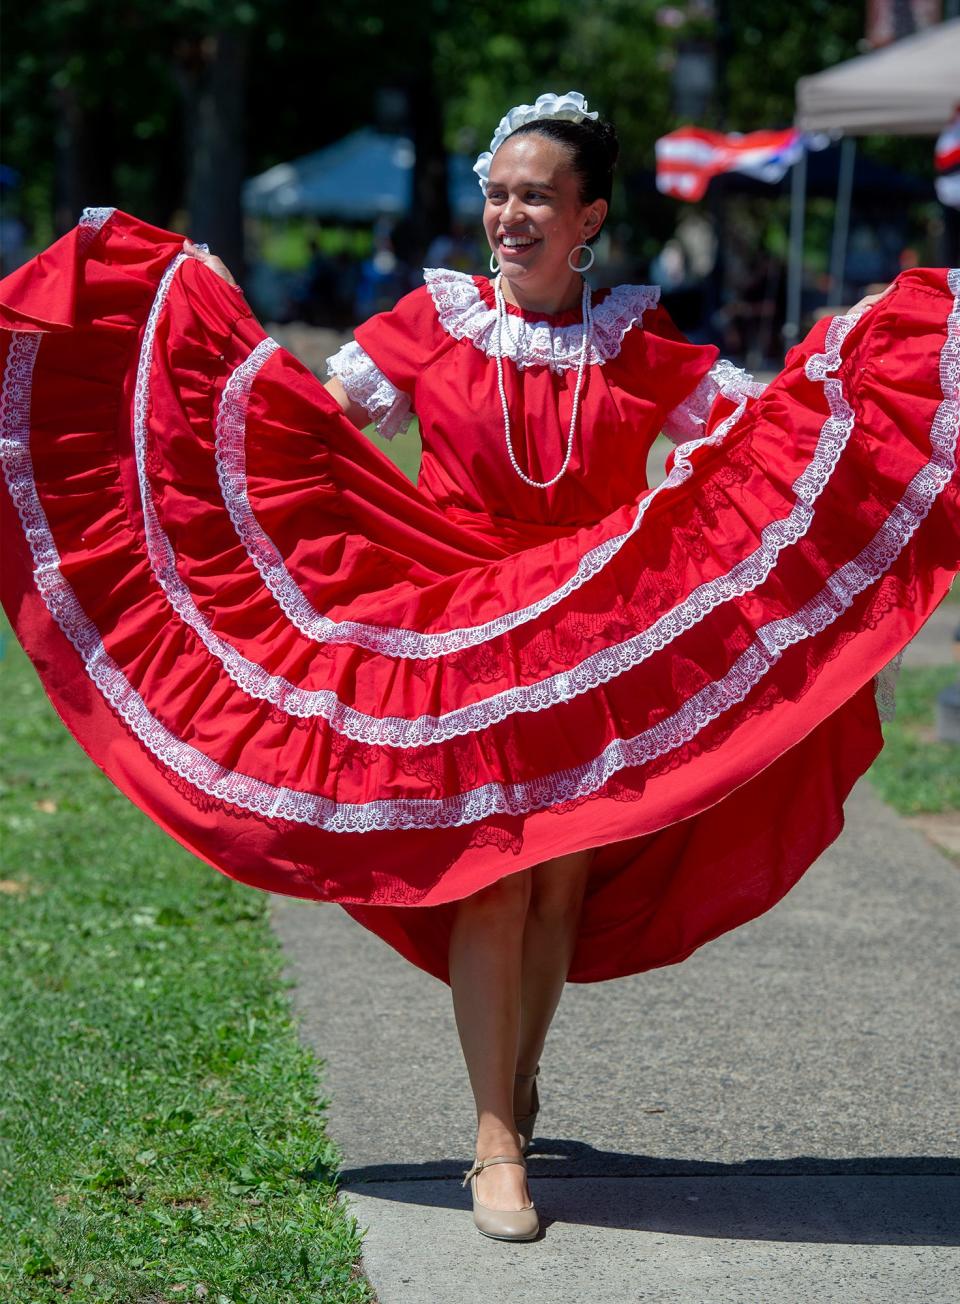 Dressed in old traditional dress is Kayla Ruiz, of Bristol Borough, as she heads to the gazebo, during the 49th annual Puerto Rican Day Festival, held in Bristol Borough on Saturday, July 30, 2022.